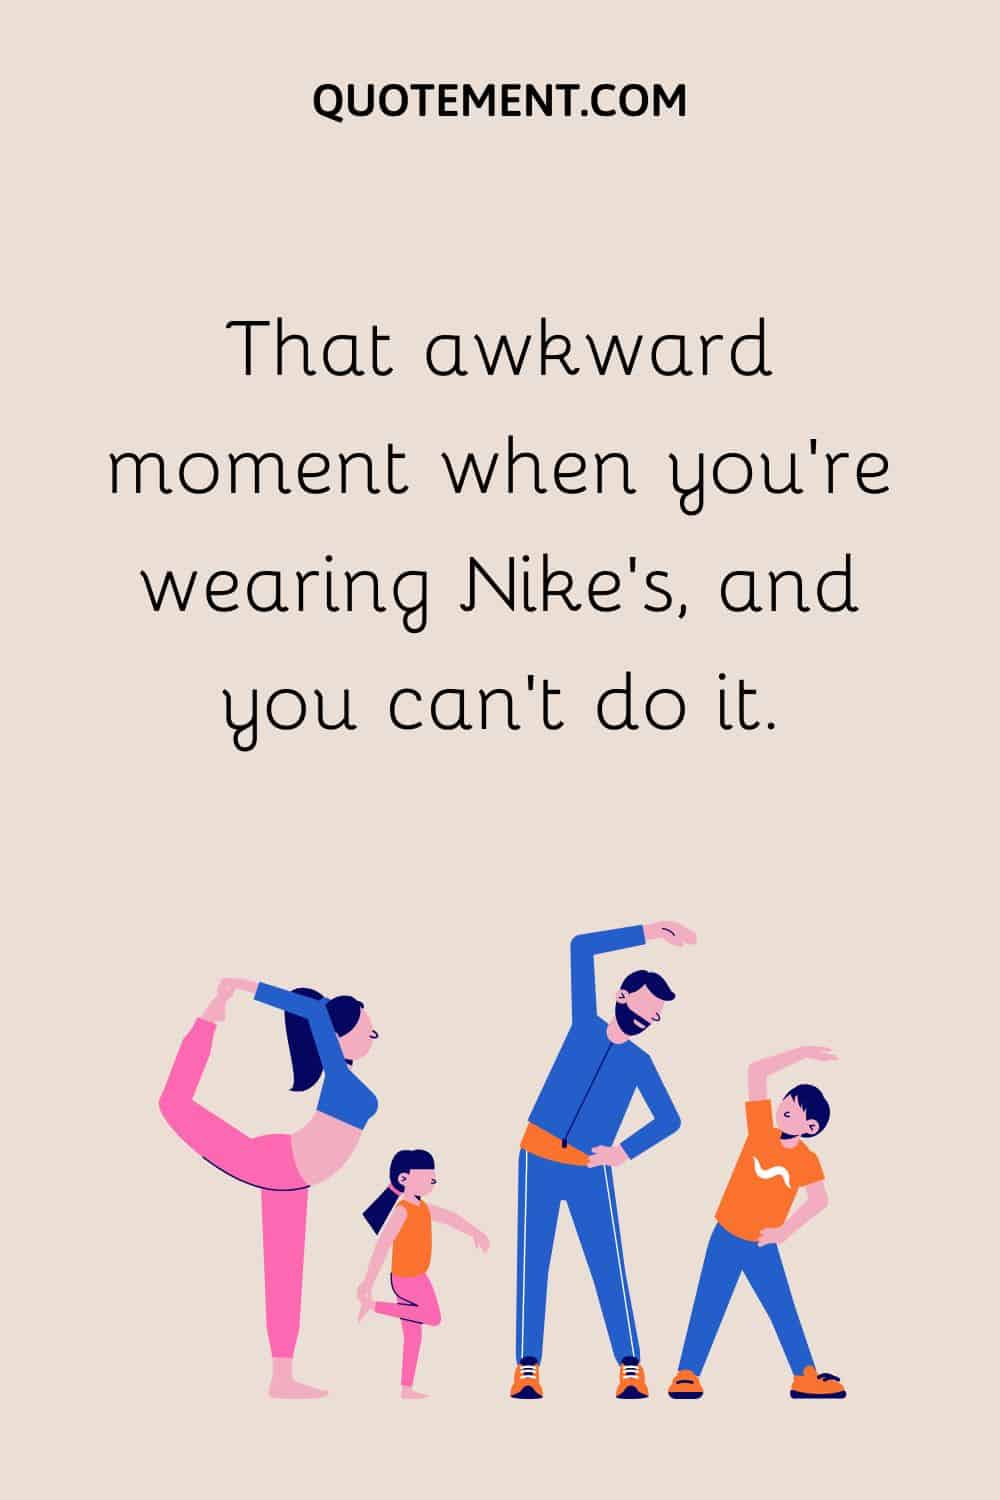 That awkward moment when you’re wearing Nike’s, and you can’t do it